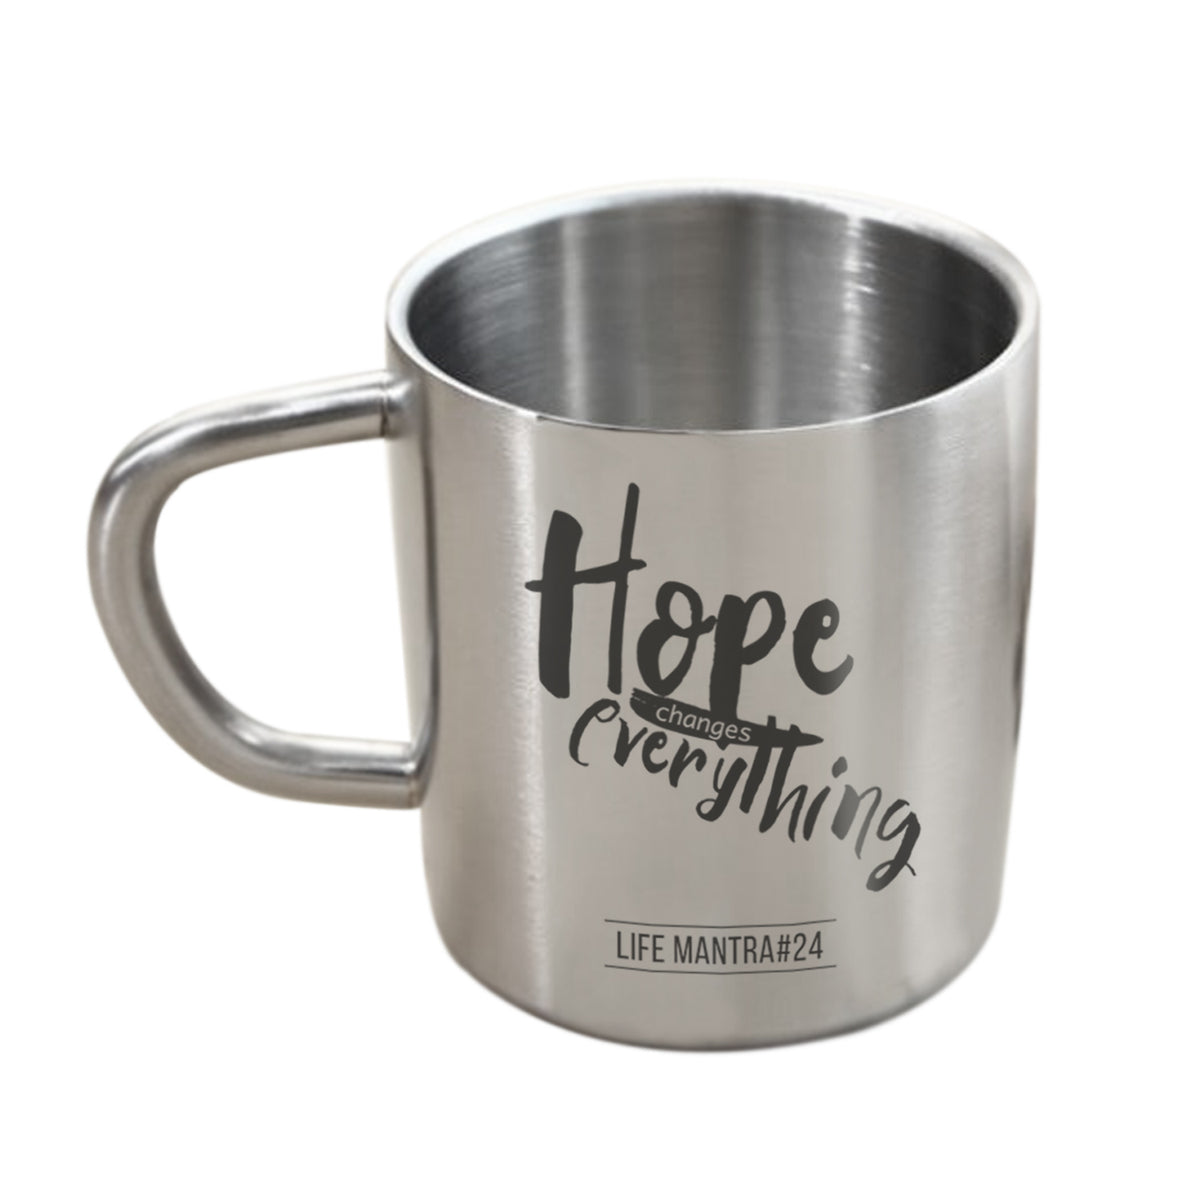 Hope changes everything - Use Your Own Mug